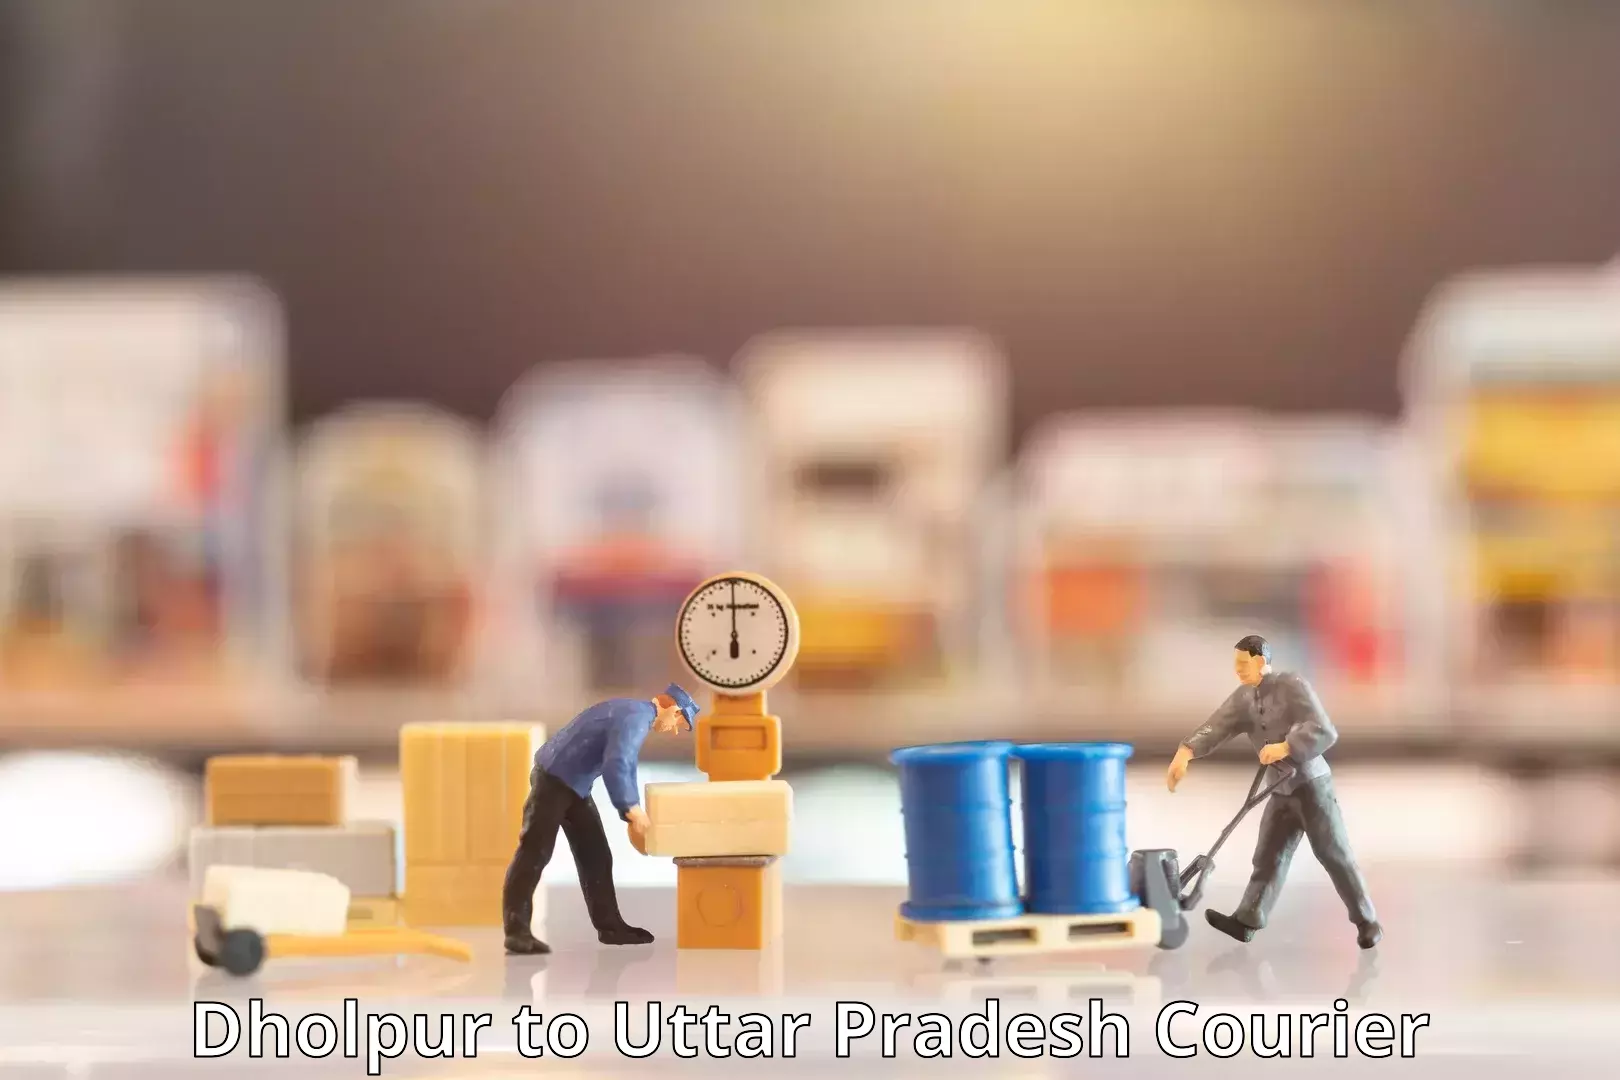 Subscription-based courier Dholpur to Uttar Pradesh